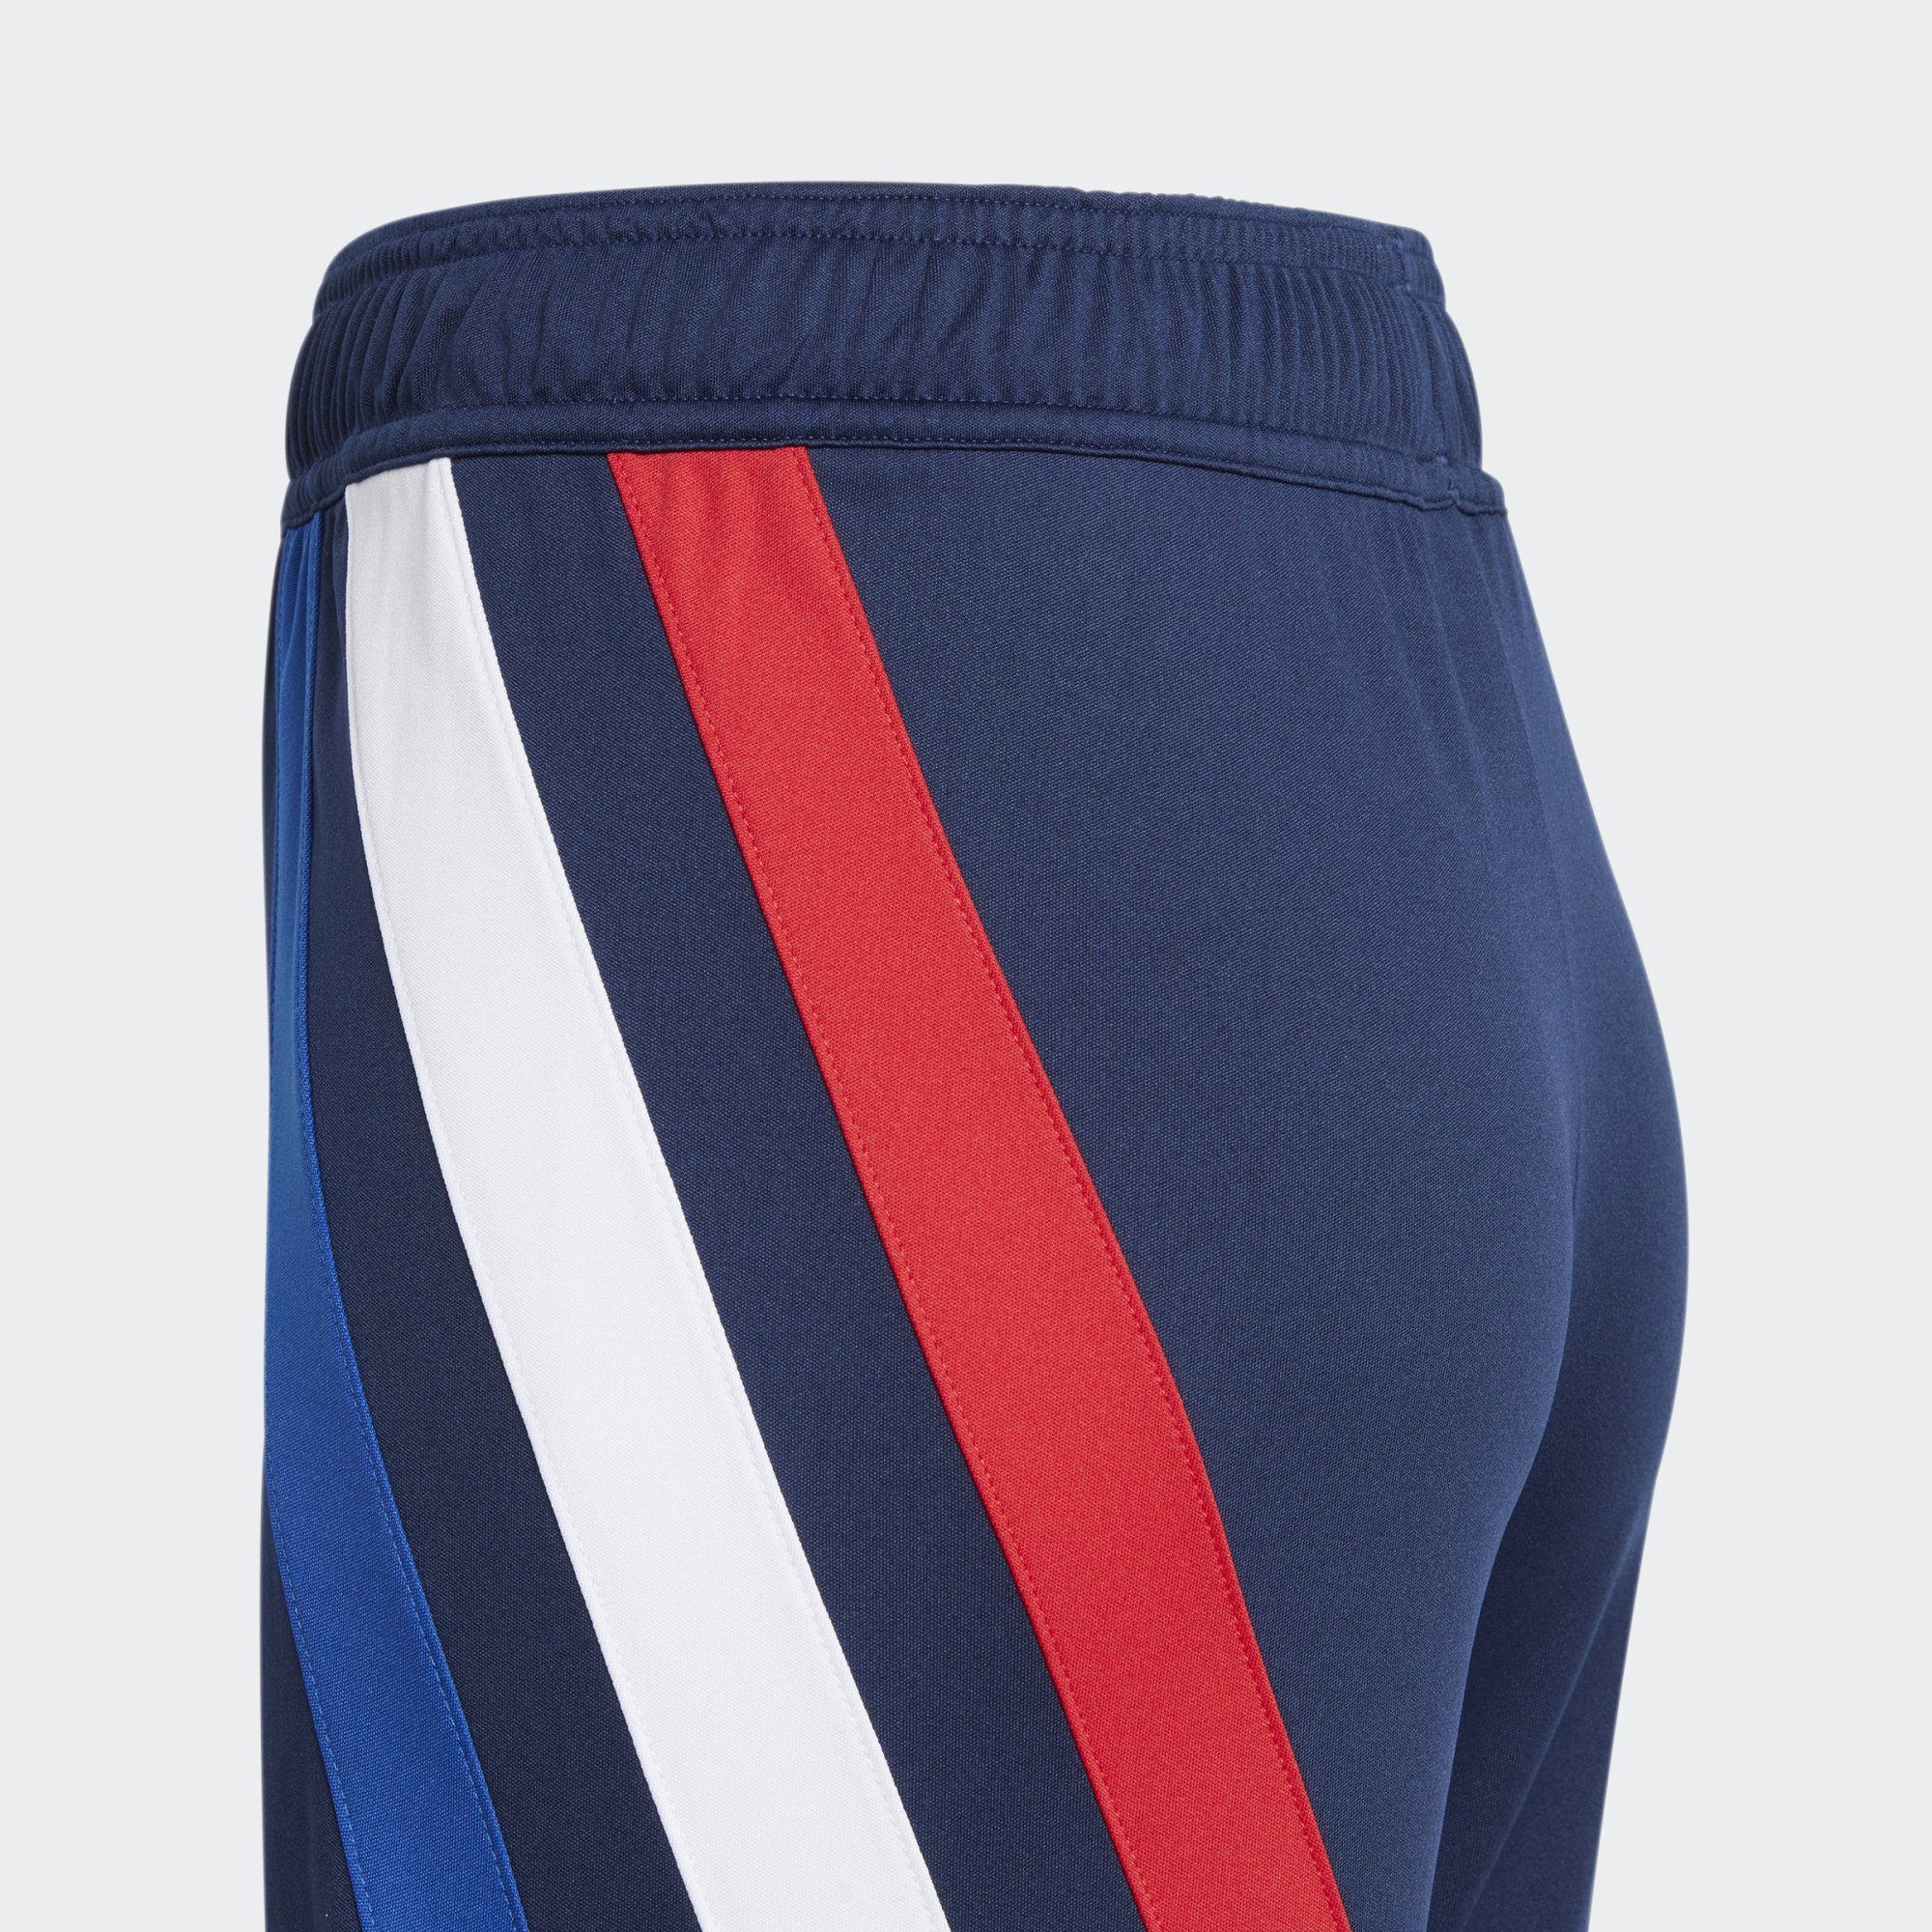 adidas Performance Funktionsshorts FORTORE 23 Navy Collegiate White SHORTS / Team Royal Red / Team 2 Blue Blue 